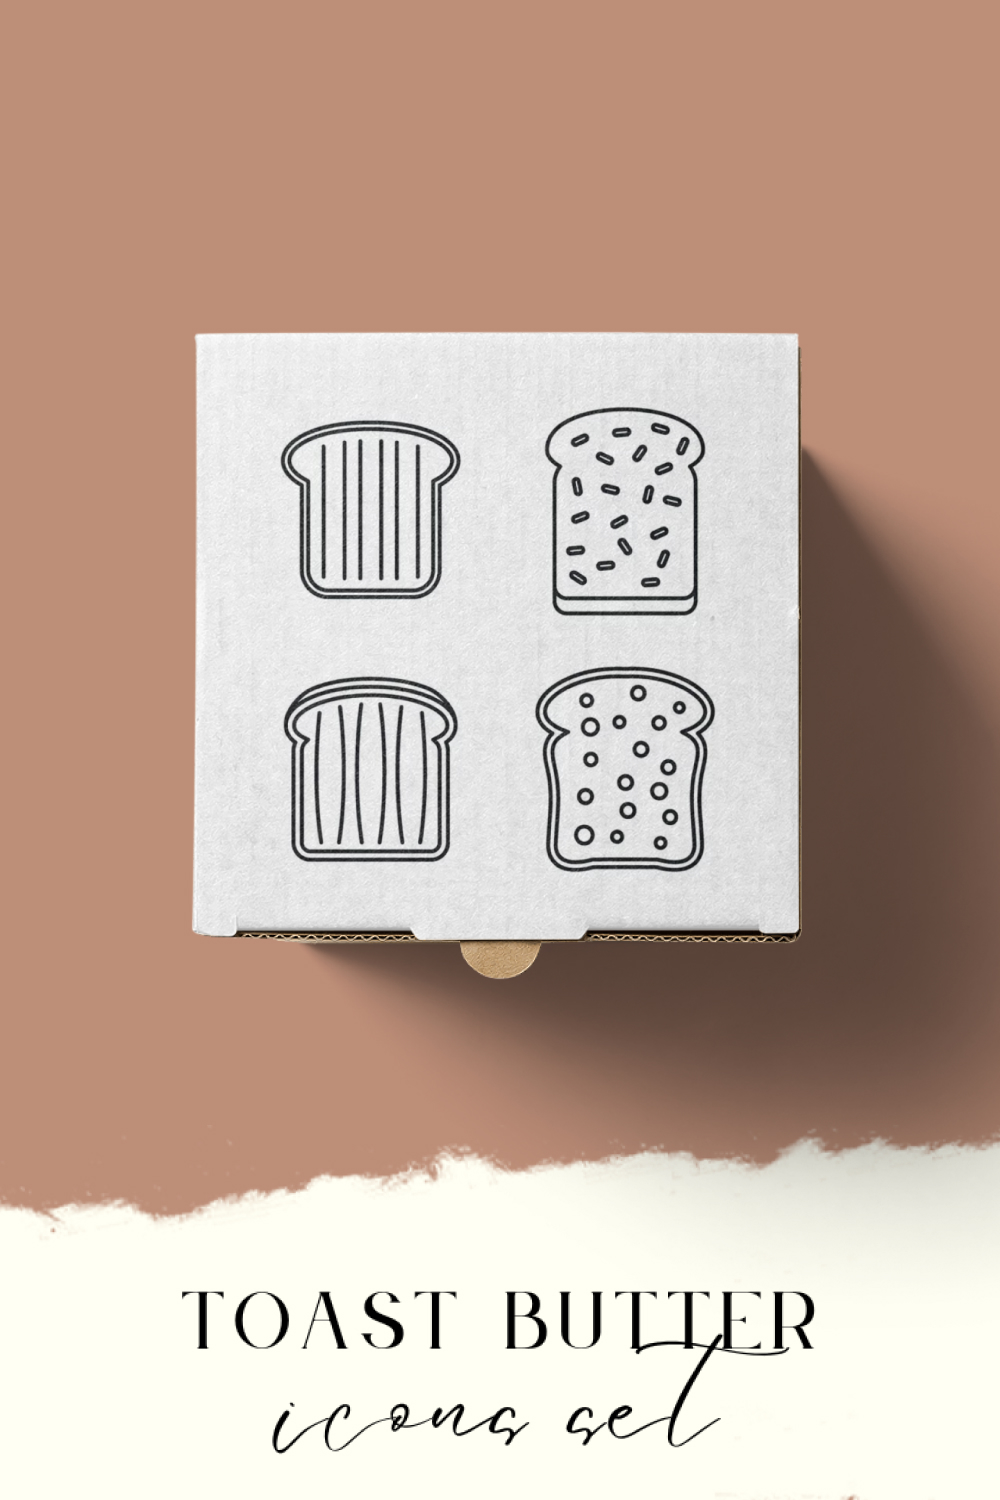 Toast butter icons set of pinterest.